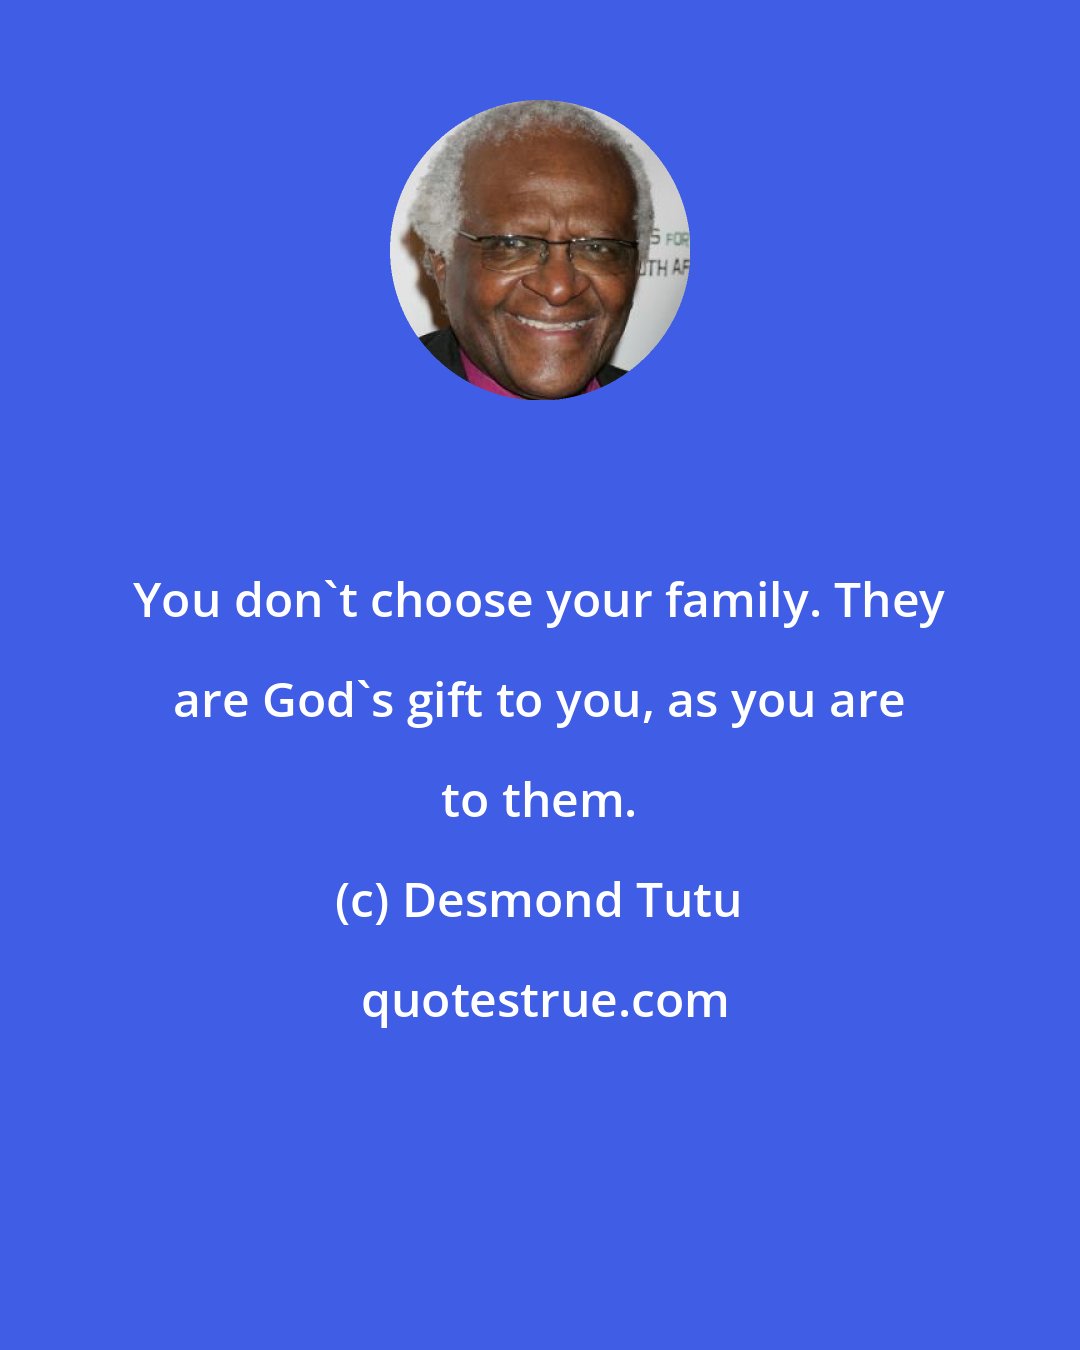 Desmond Tutu: You don't choose your family. They are God's gift to you, as you are to them.